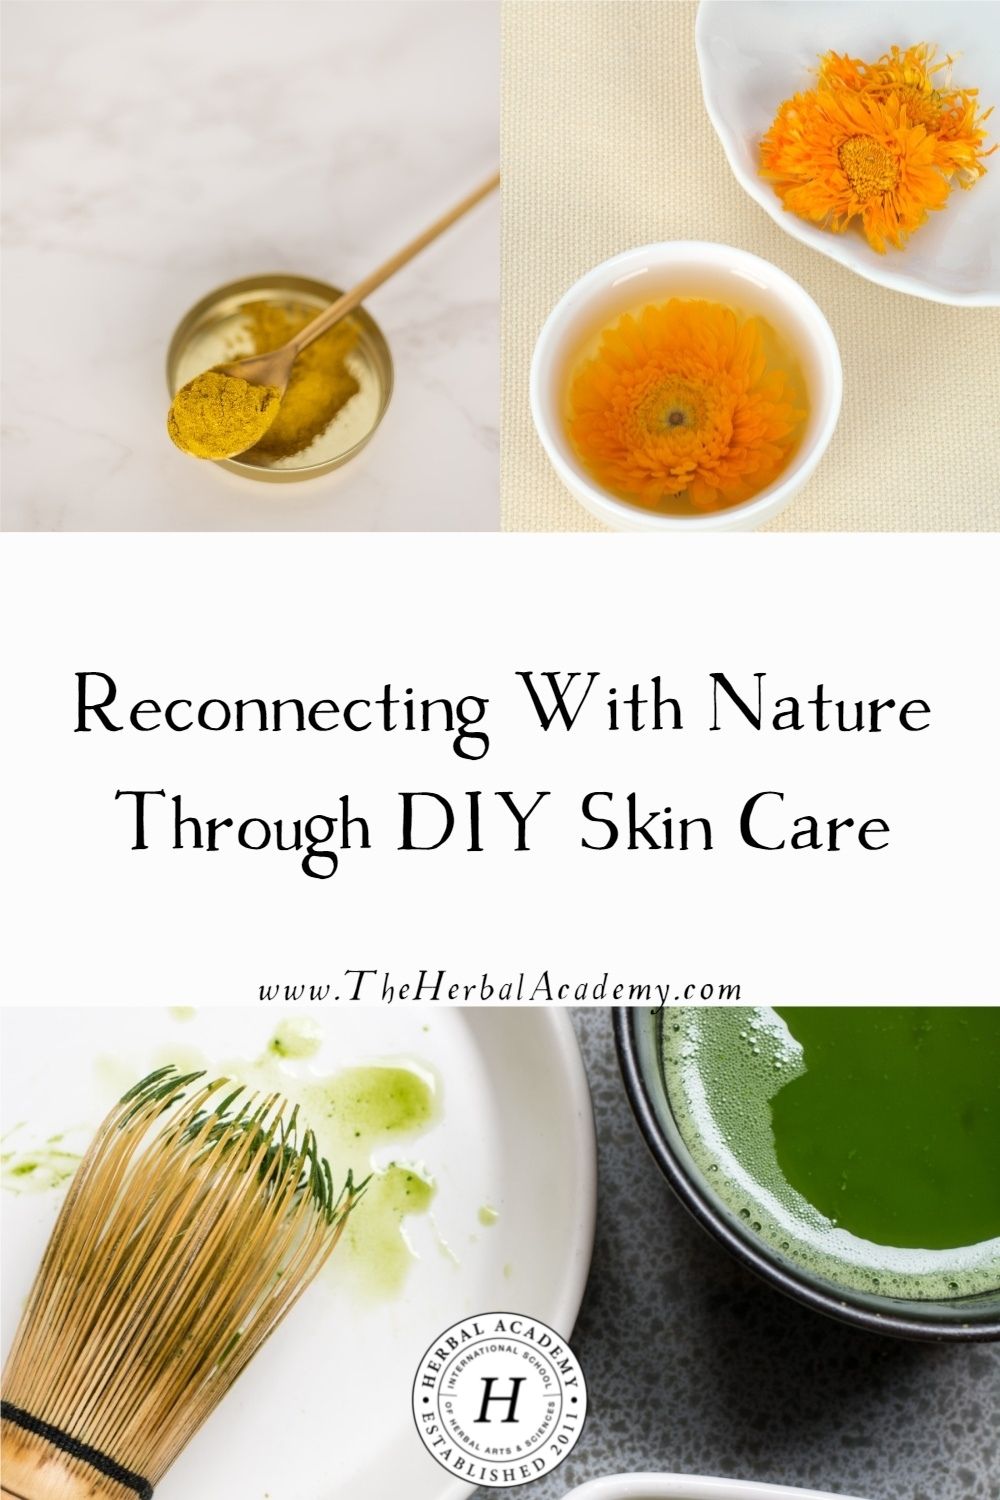 Reconnecting With Nature Through DIY Skin Care | Herbal Academy | Connecting with nature through skin care is healing for the mind, body, and spirit. Find joy in connecting through these skin care tips!